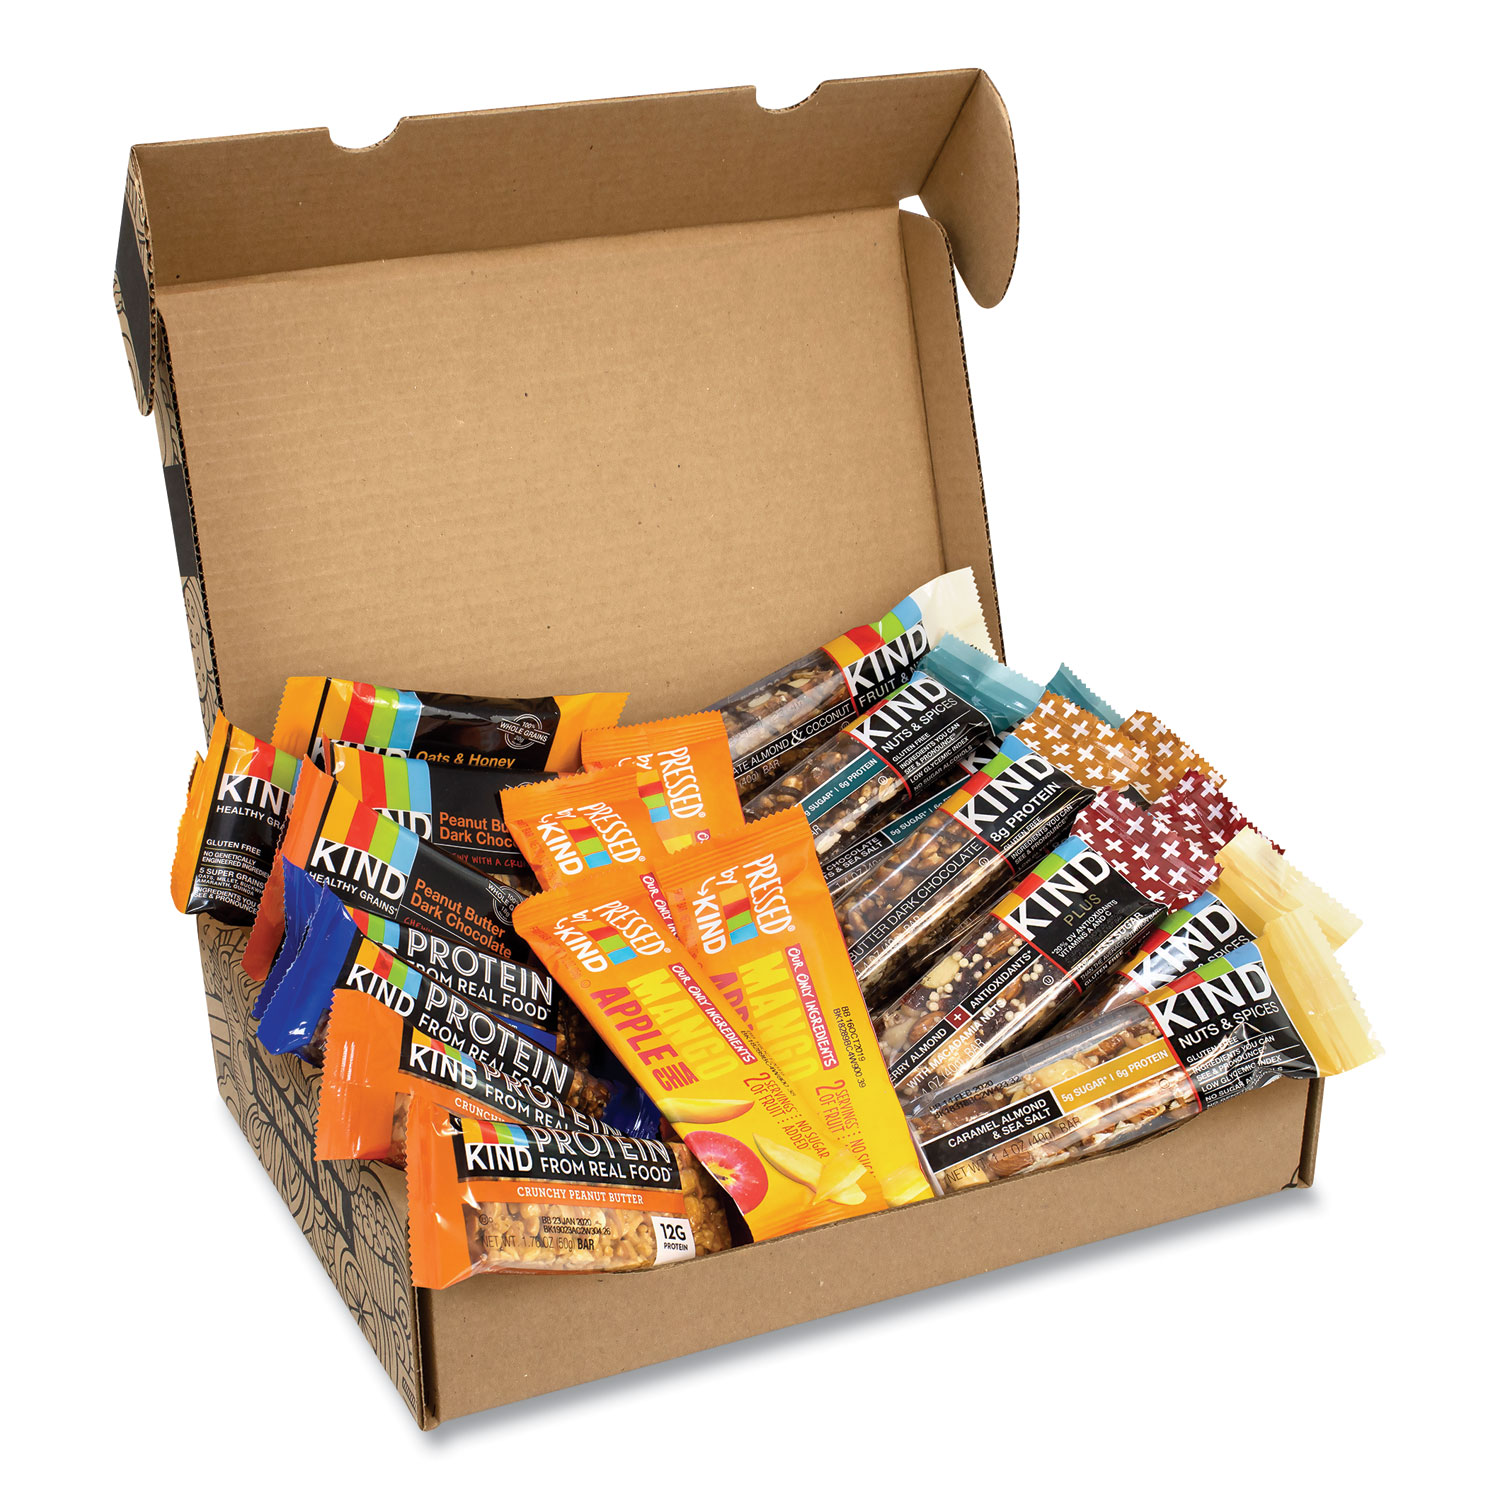  KIND 70000021 Favorites Snack Box, Assorted Variety of KIND Bars, 2.5 lb Box, 22 Bars/Box, Free Delivery in 1-4 Business Days (GRR700S0021) 